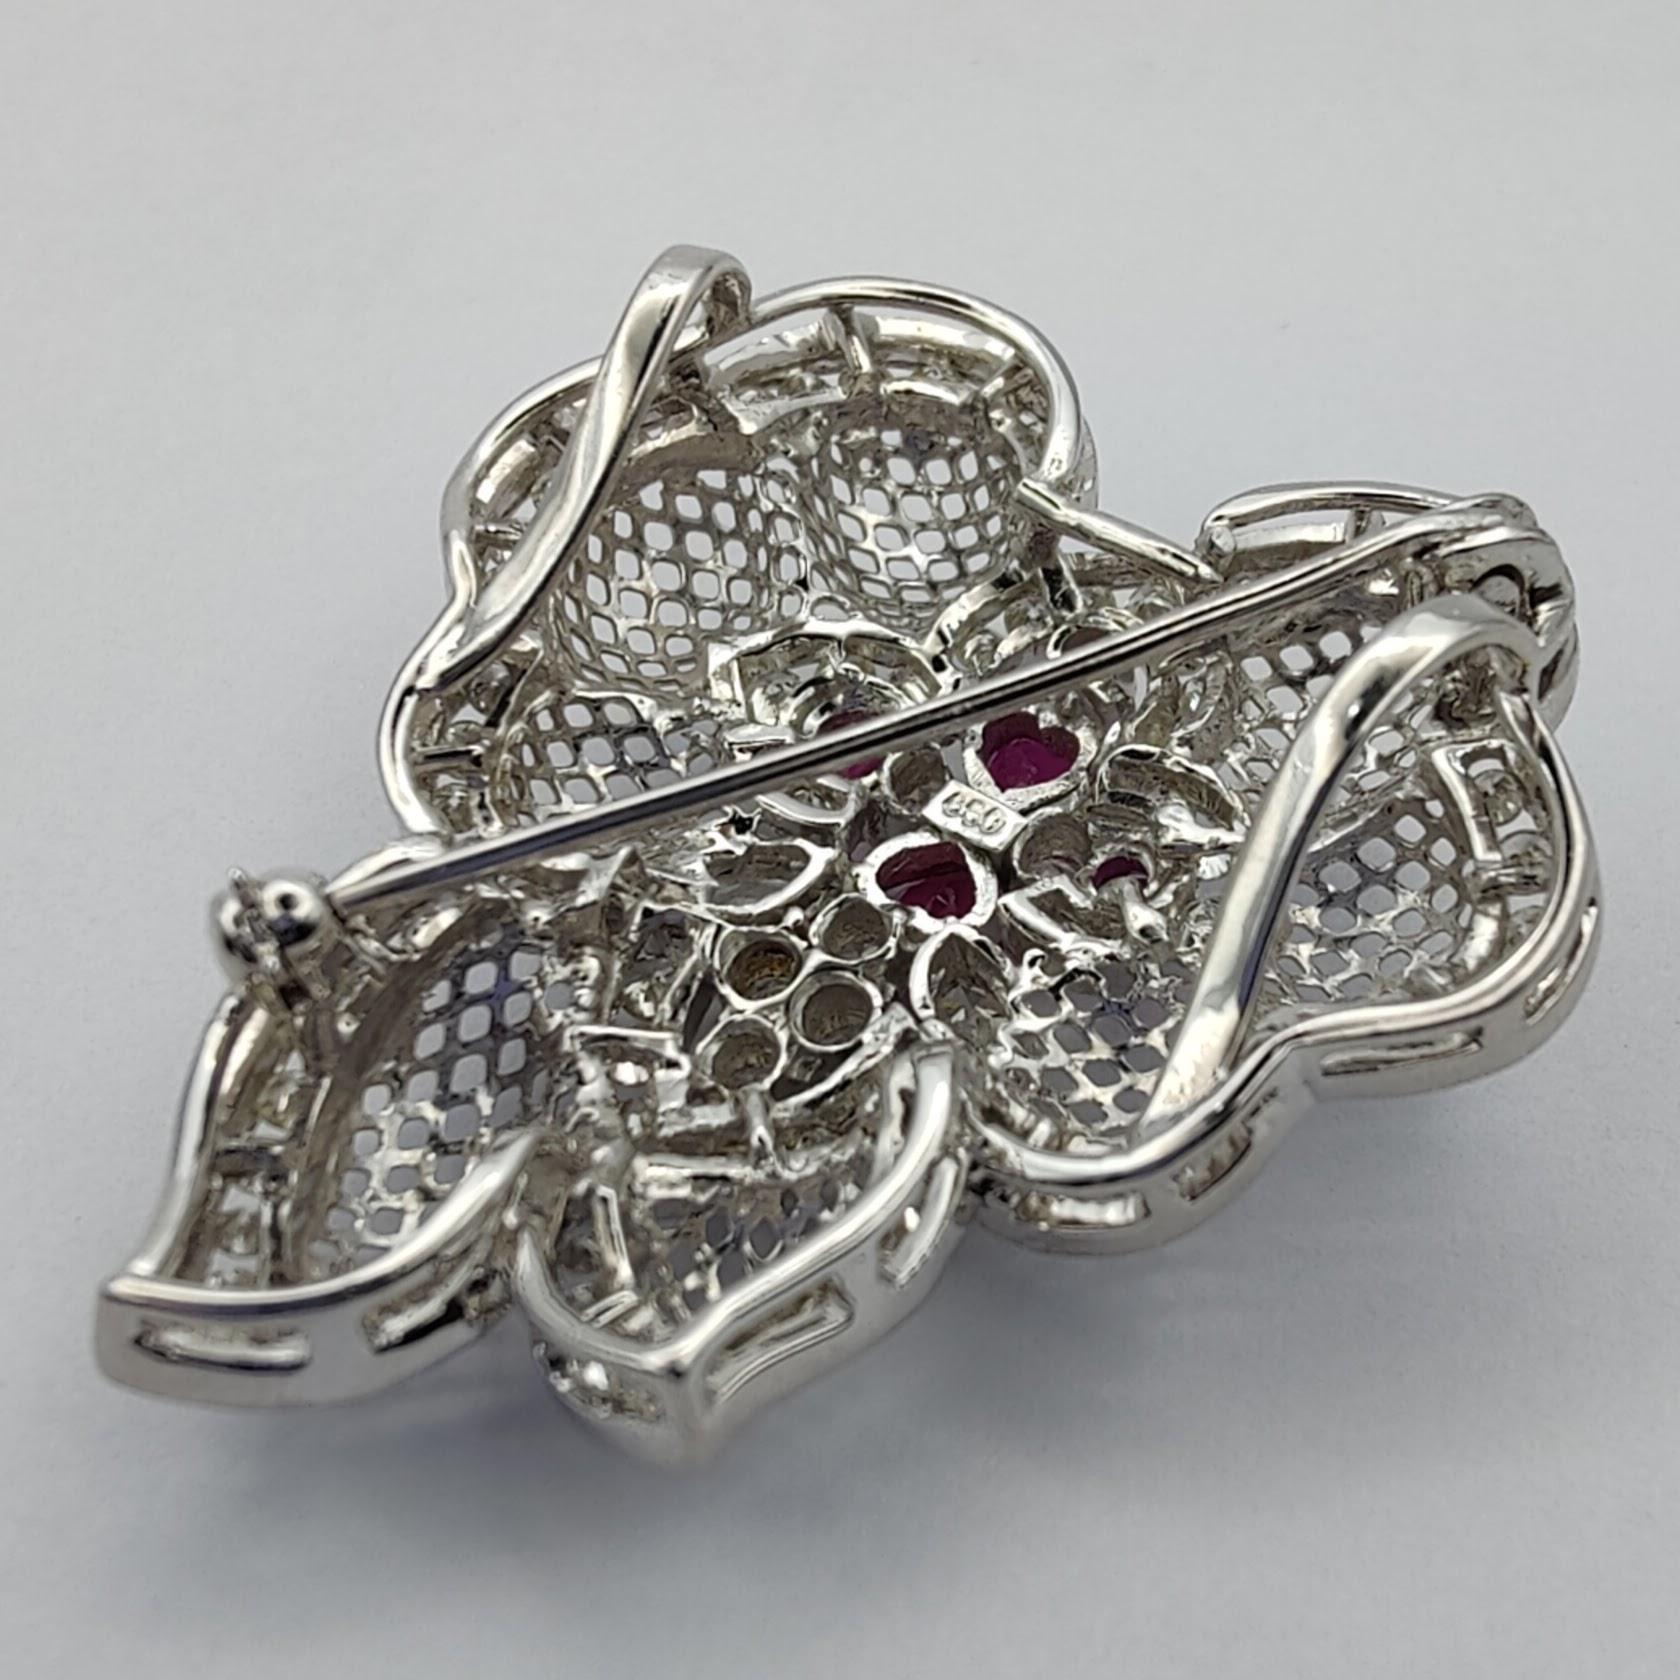 Baroque 0.78 Carat Ruby and 2.7 Carat Diamond Pendant Brooch in 18k White Gold For Sale 1